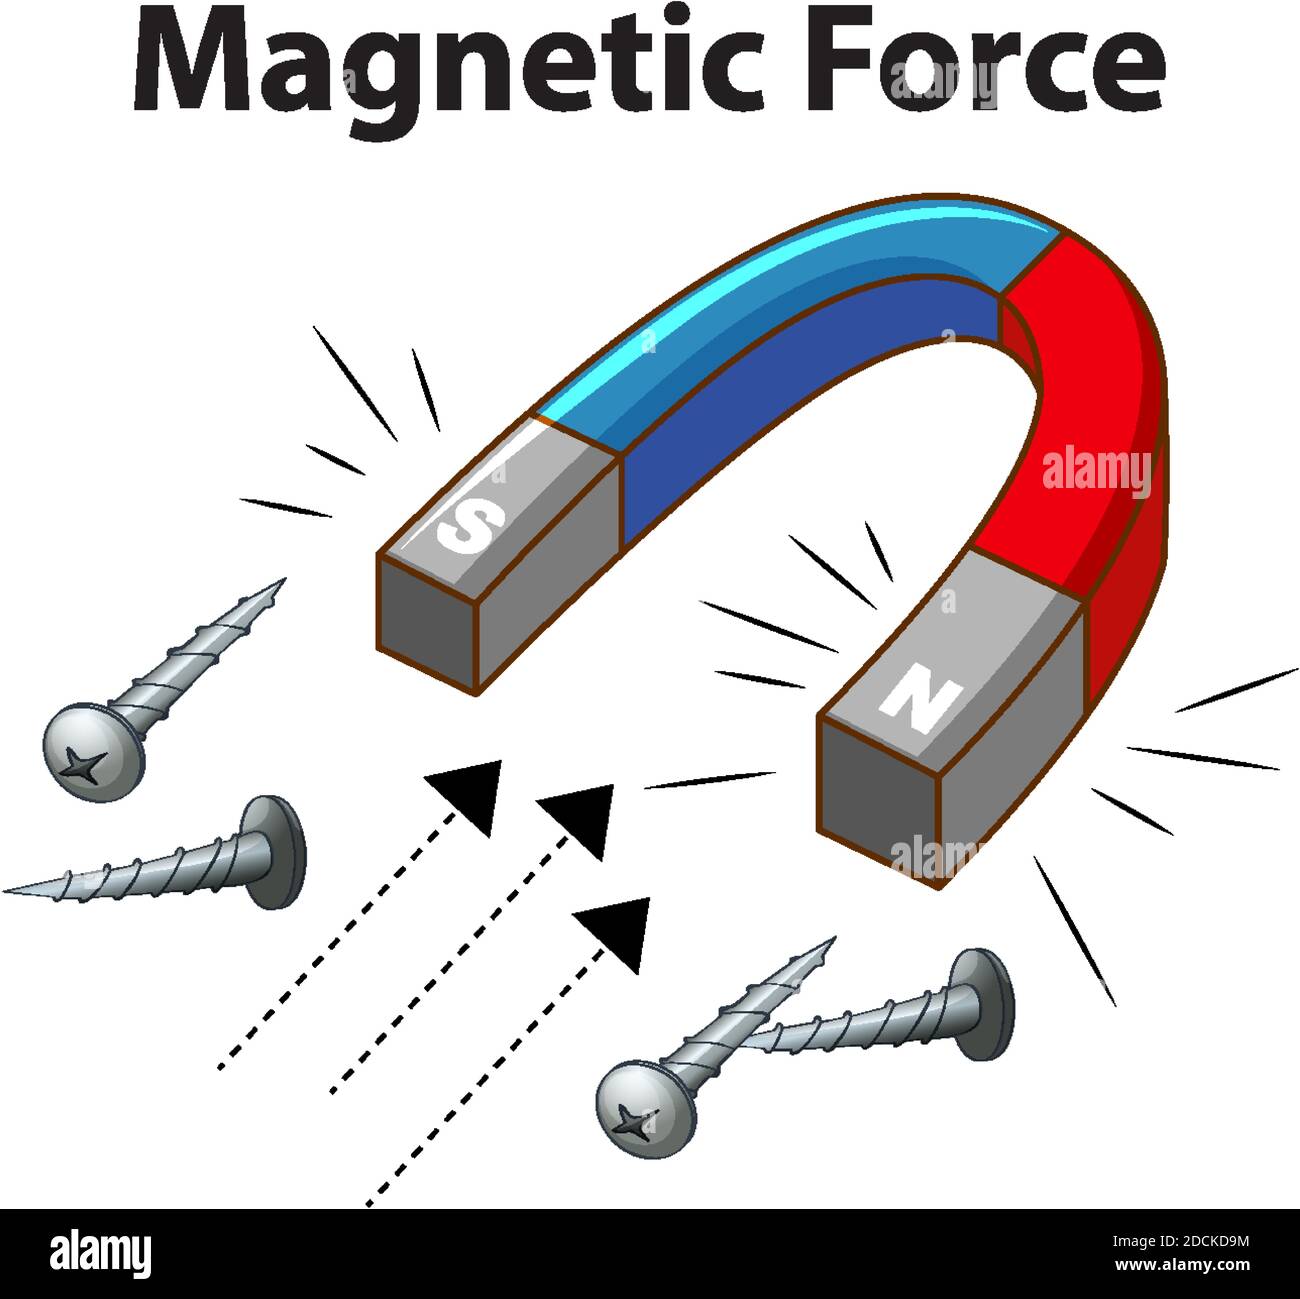 Magnetic Force High Resolution Stock Photography and Images - Alamy